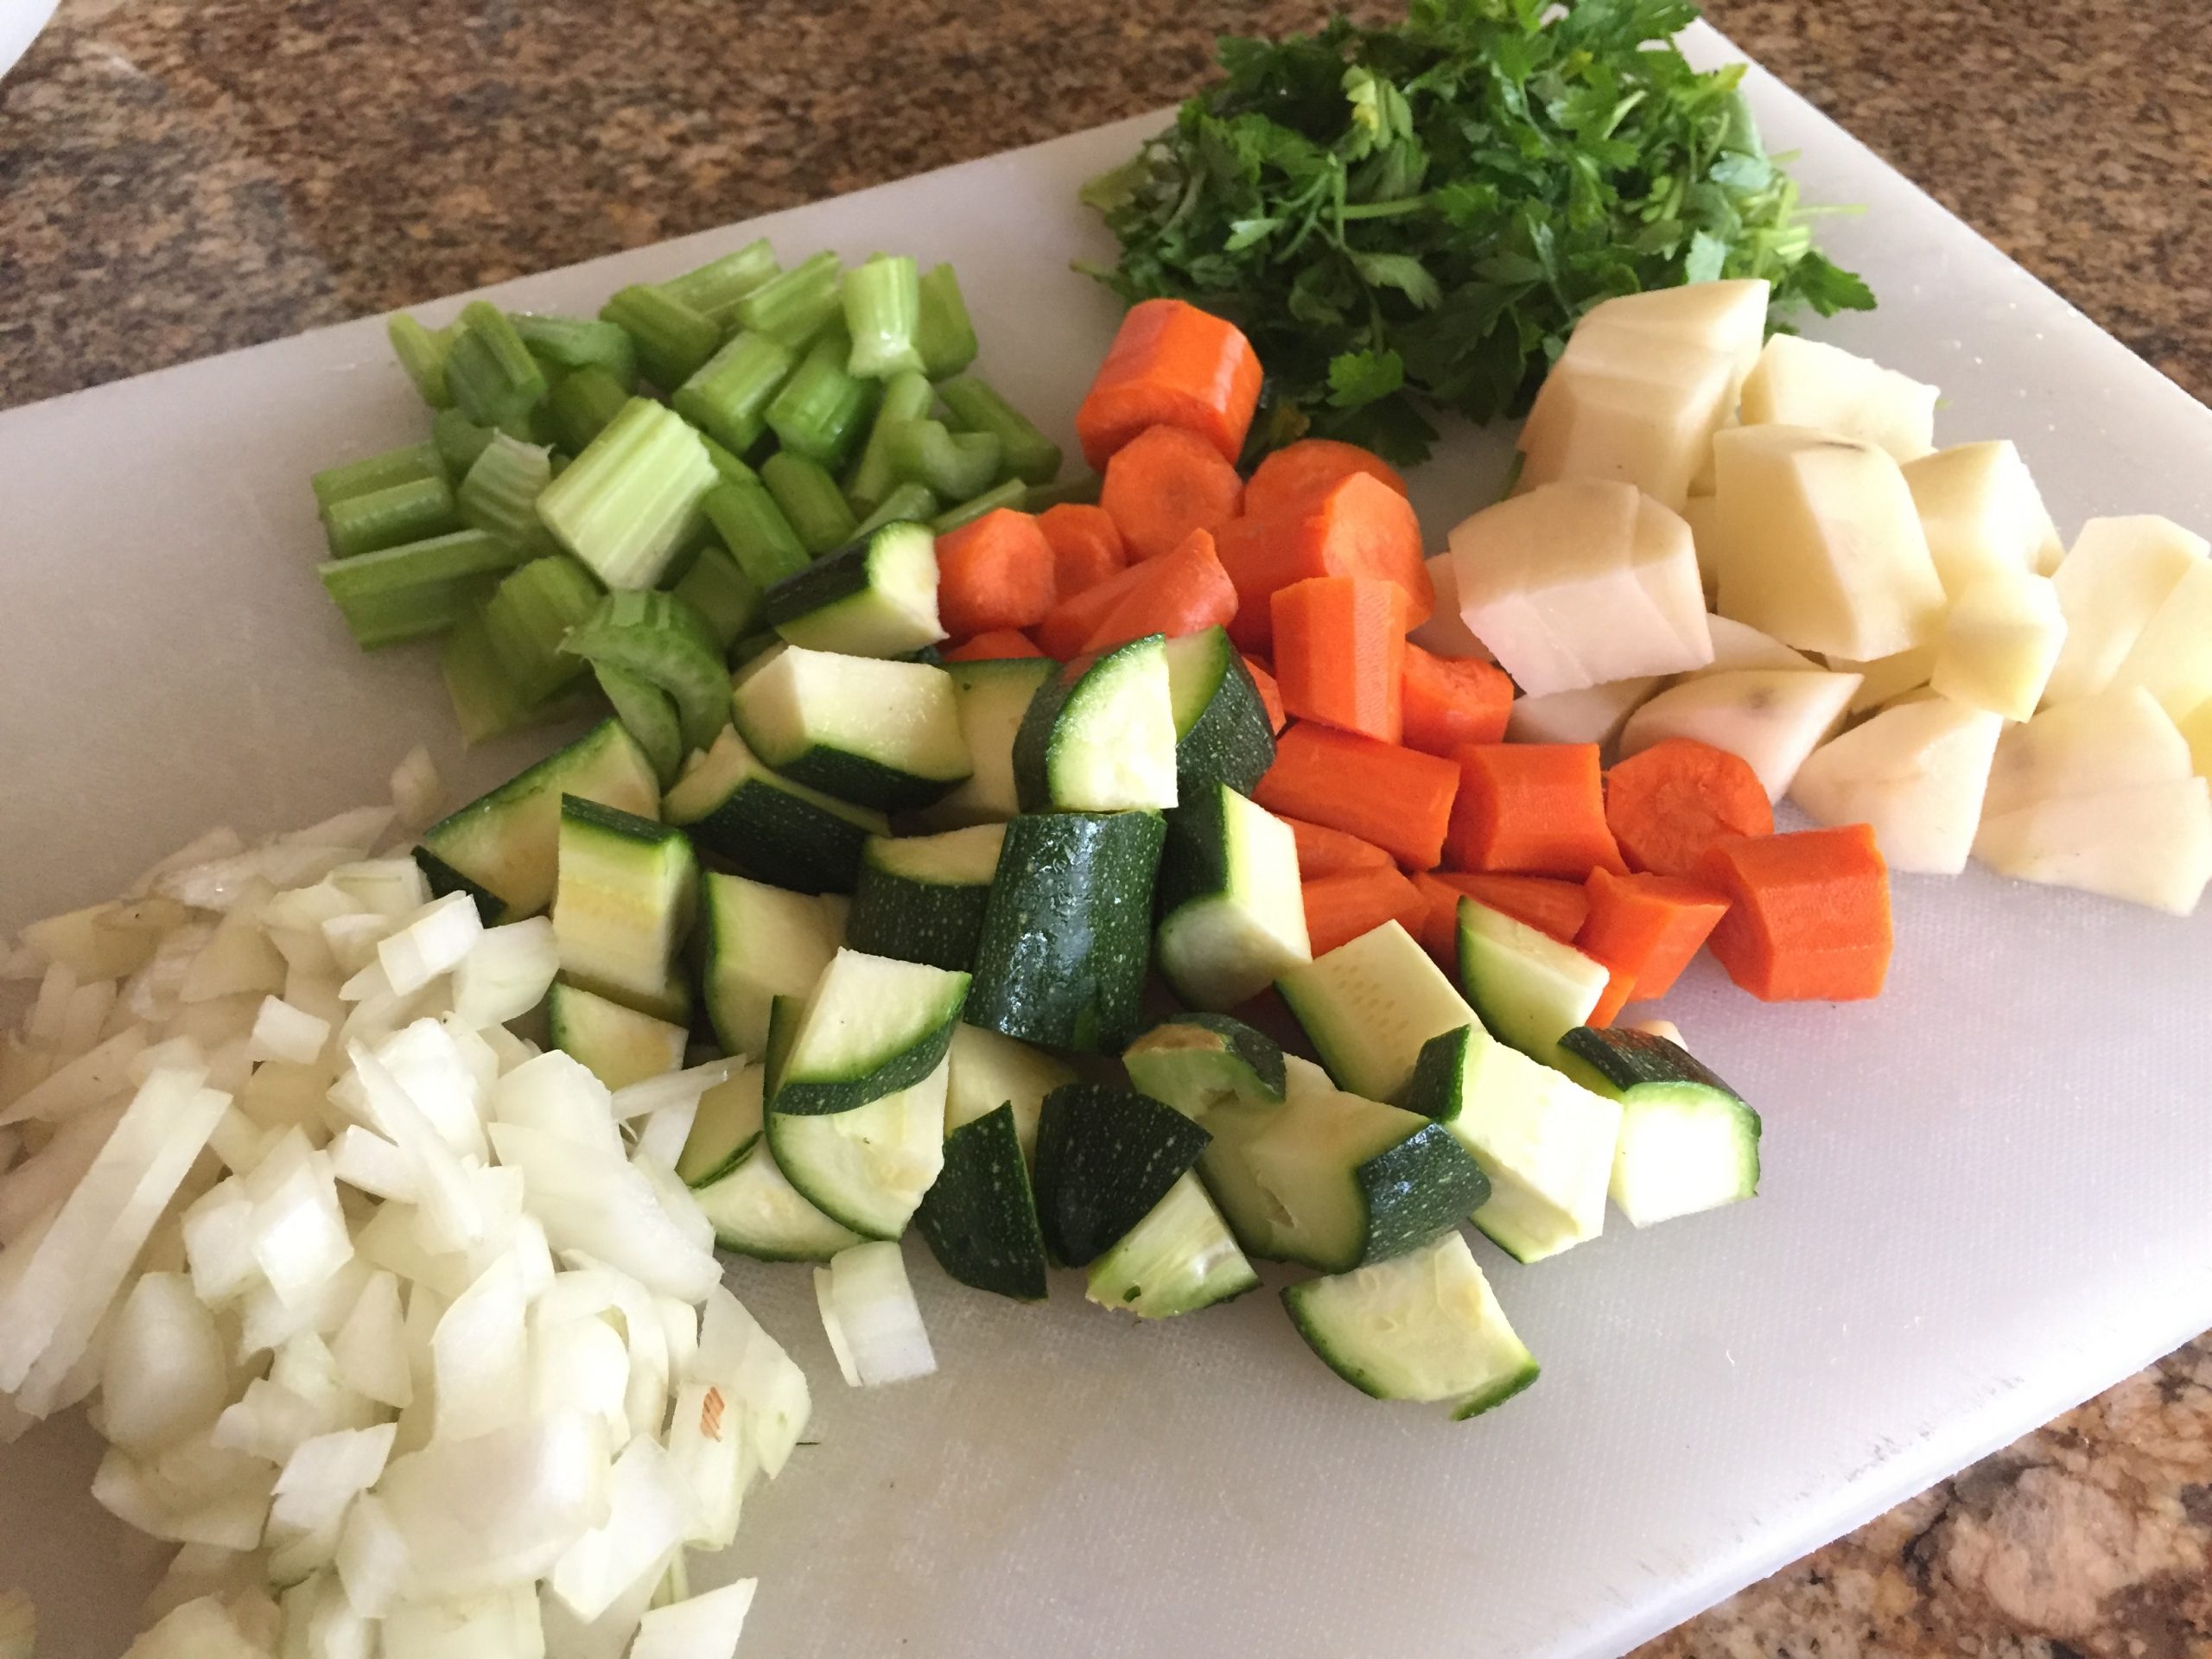 Diced onion, zucchini, carrots, potato, celery and herbs for chicken soup with vegetables